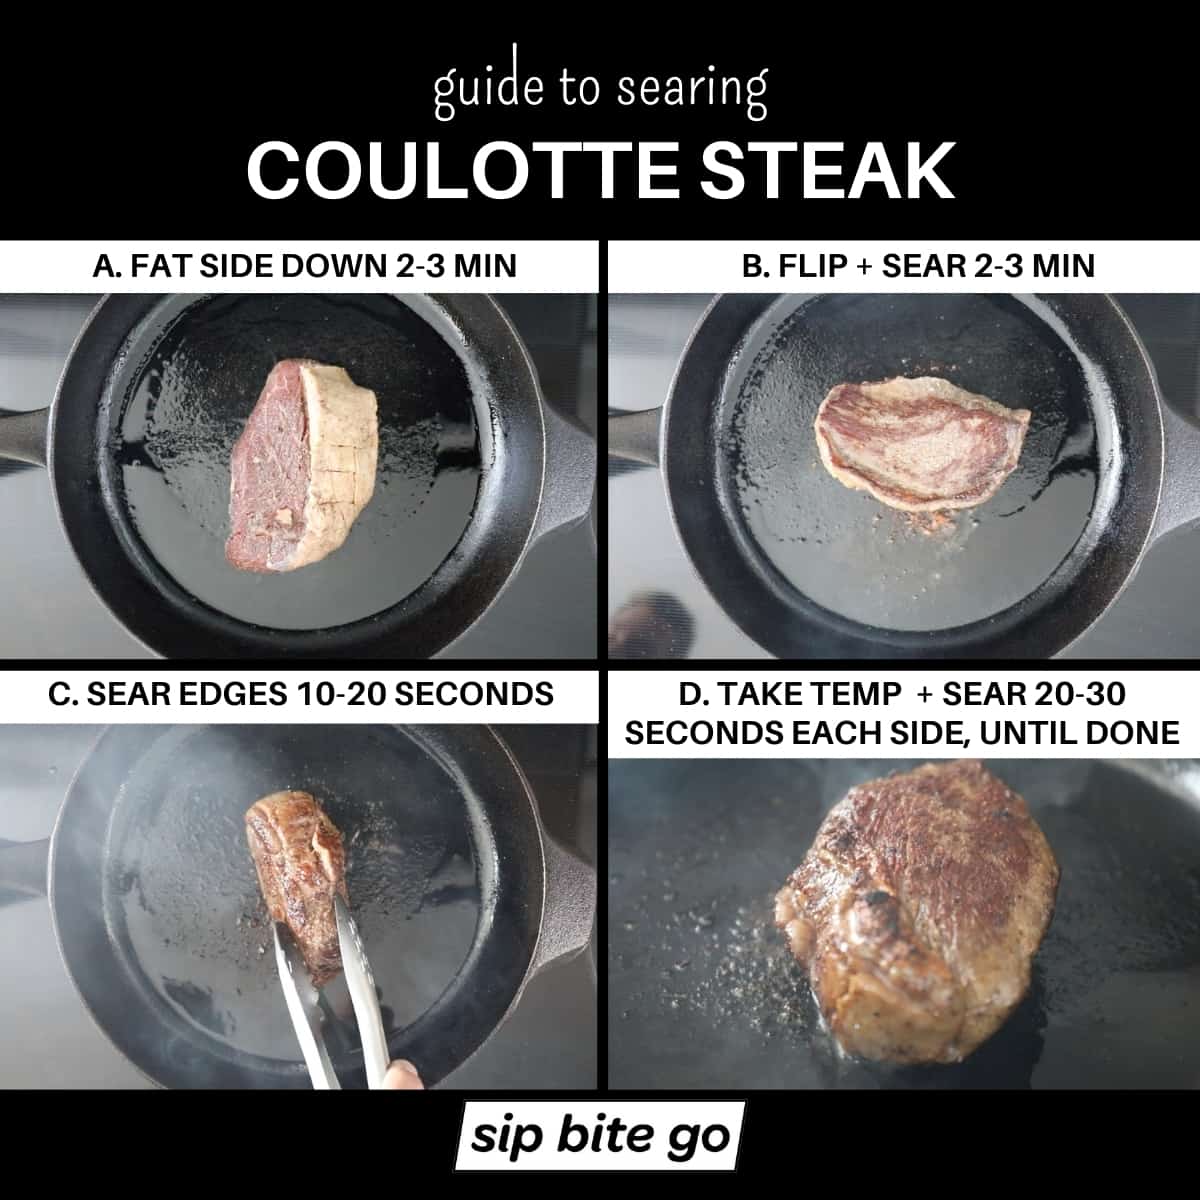 image collage demonstrating how to sear coulotte steak infographic chart.